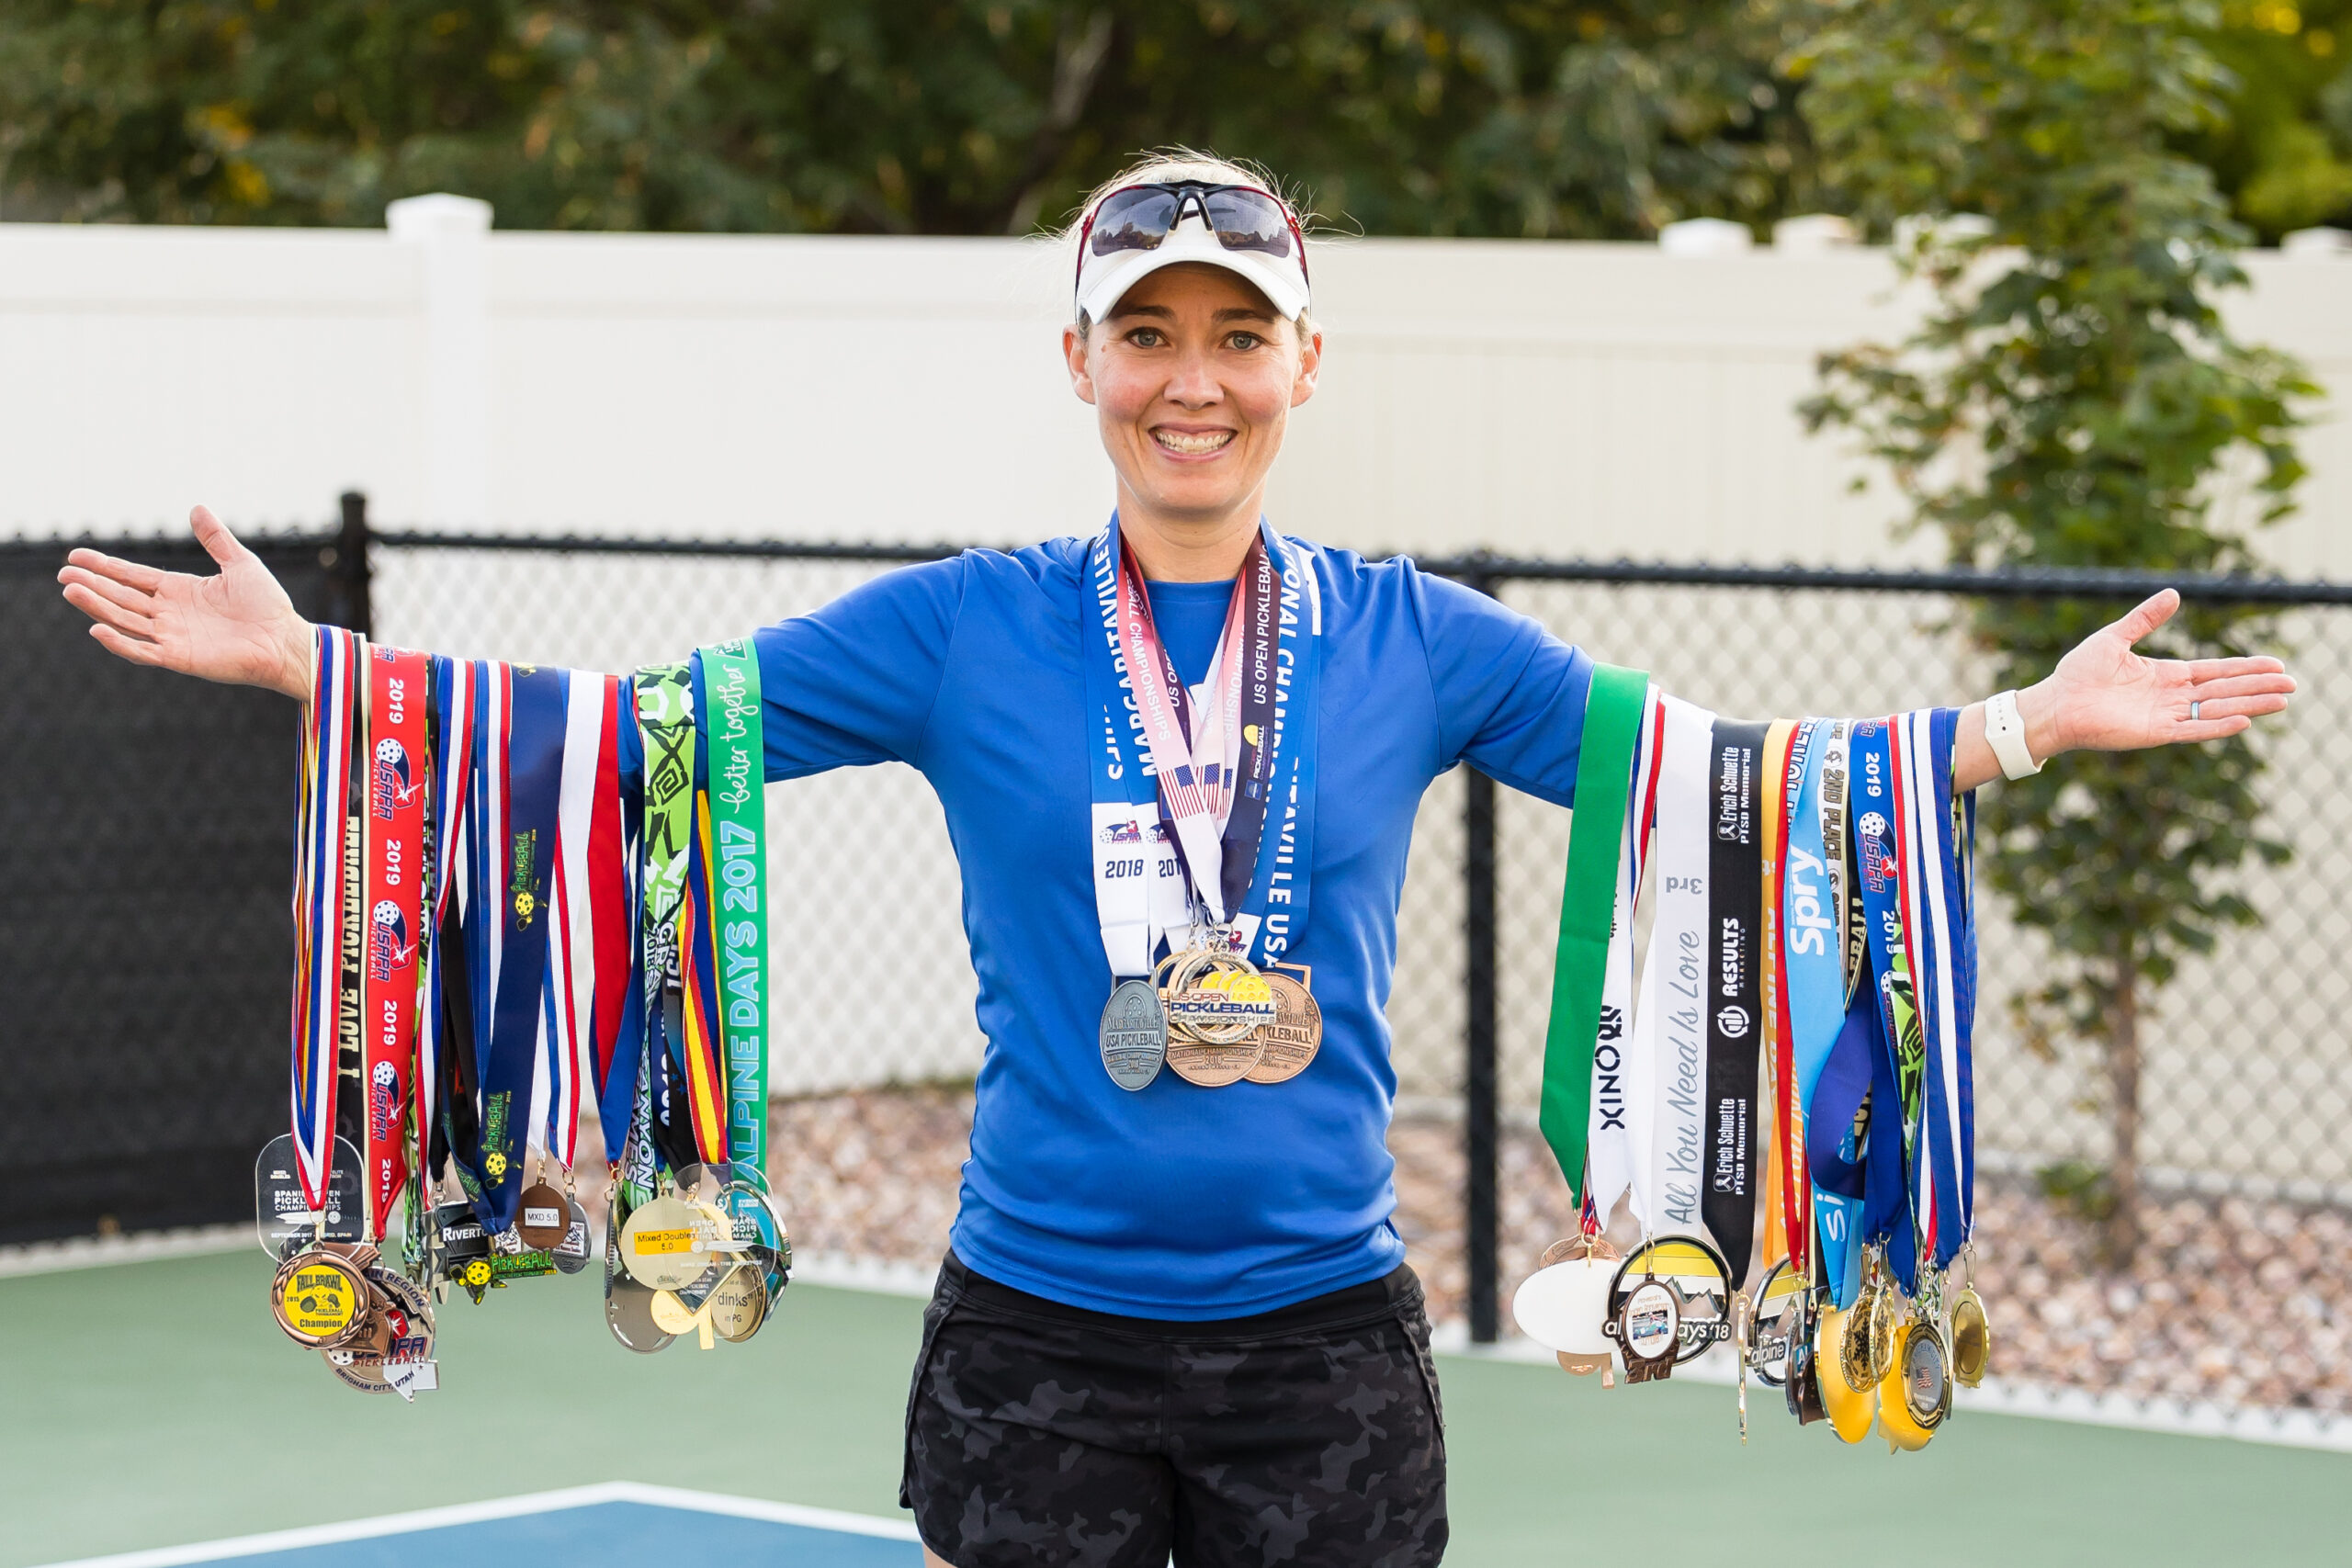 Suzee Anderson playing pickleball, holding all her medals